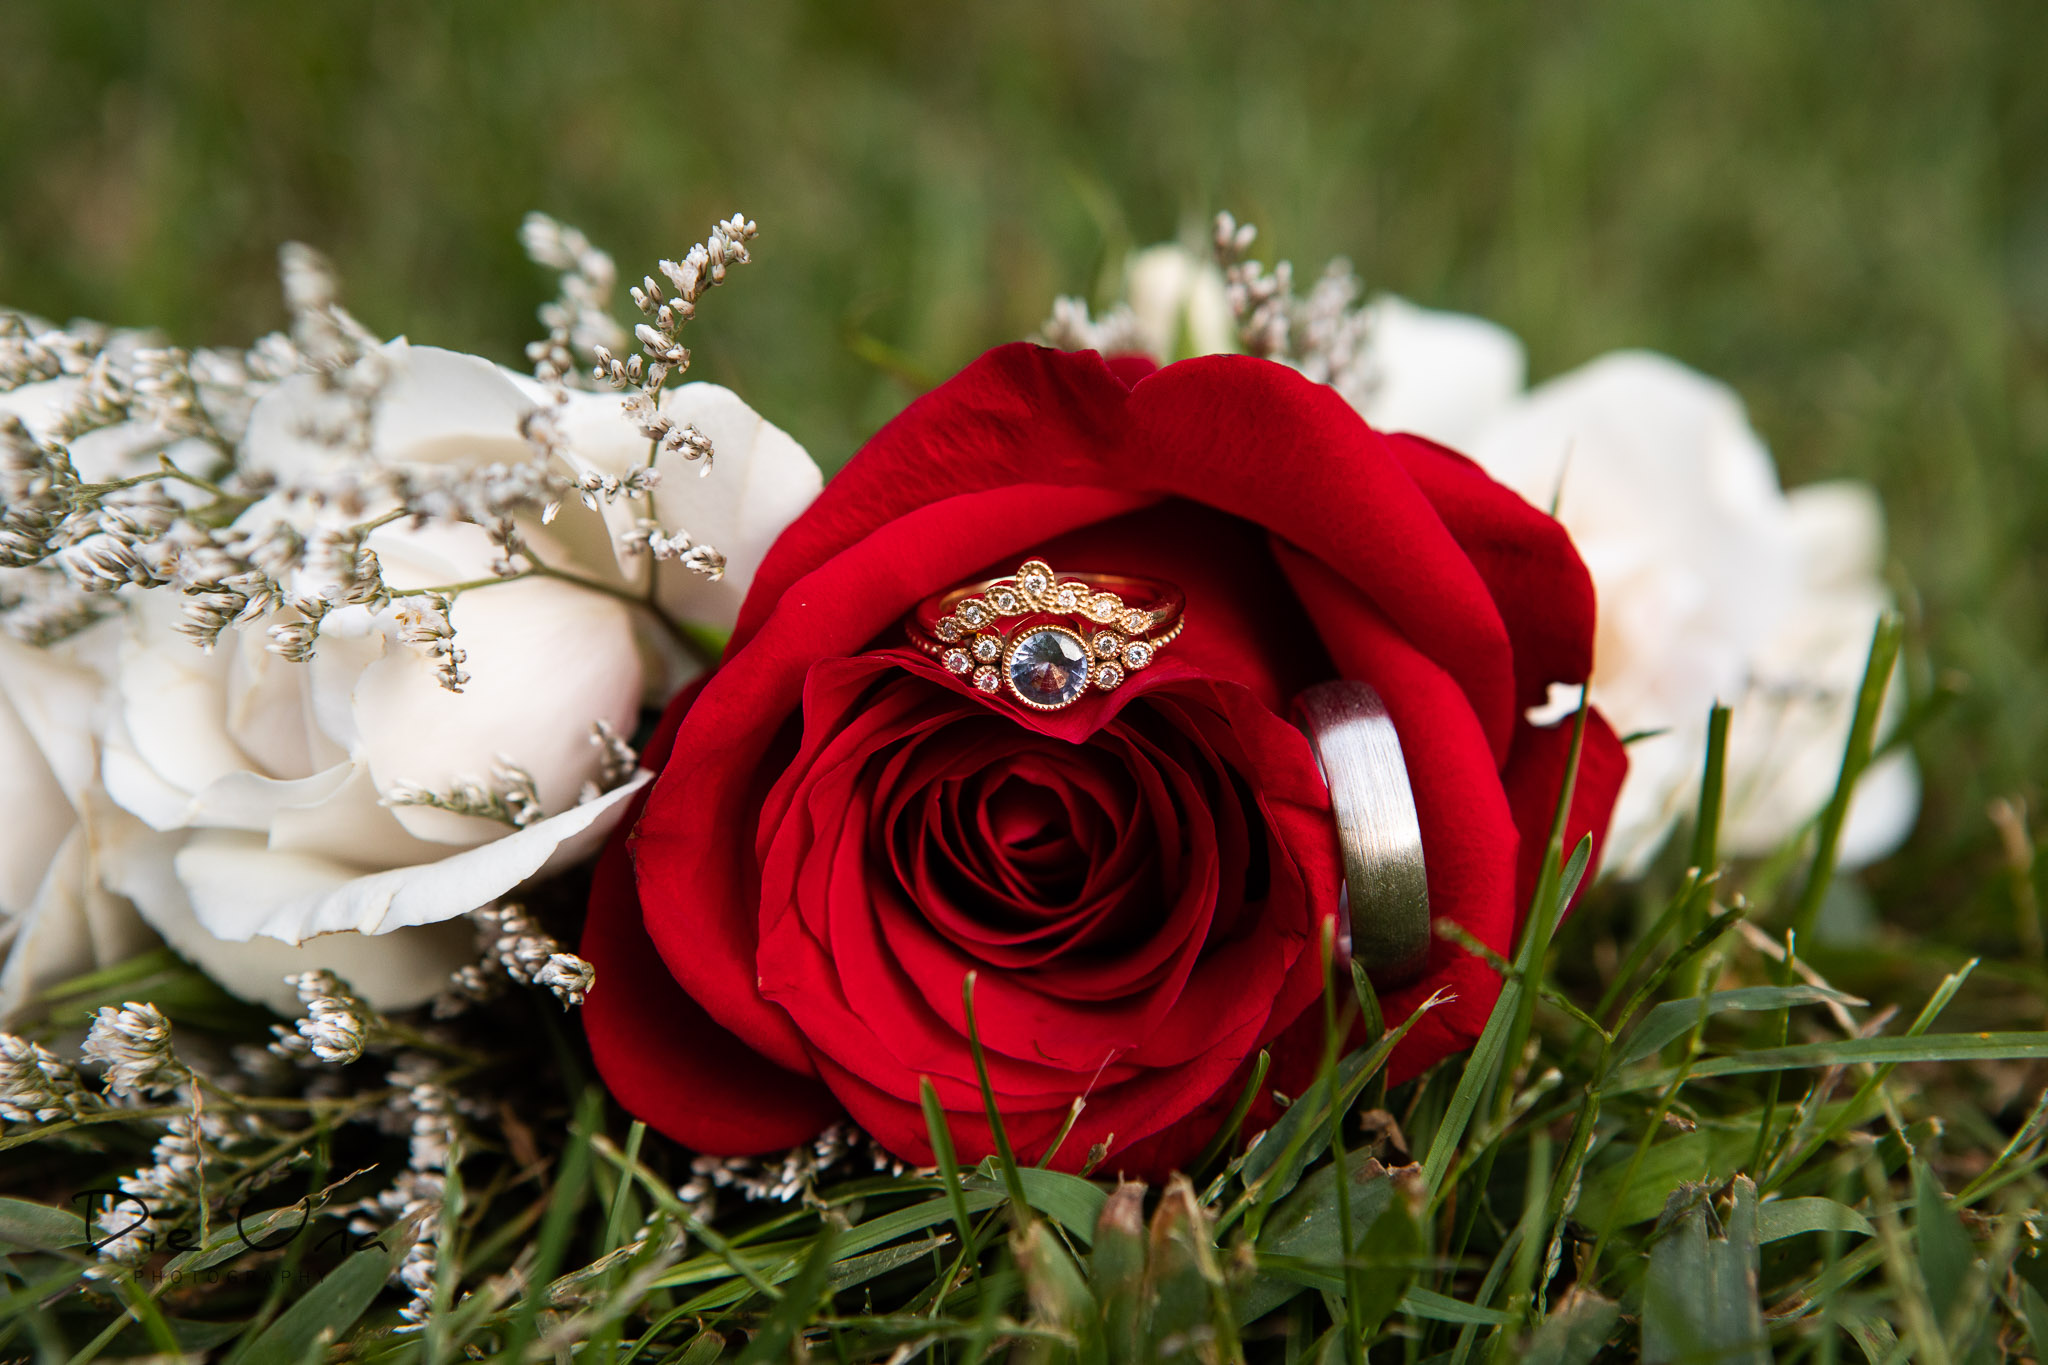 wedding rings in red and white flower bouquet.jpg